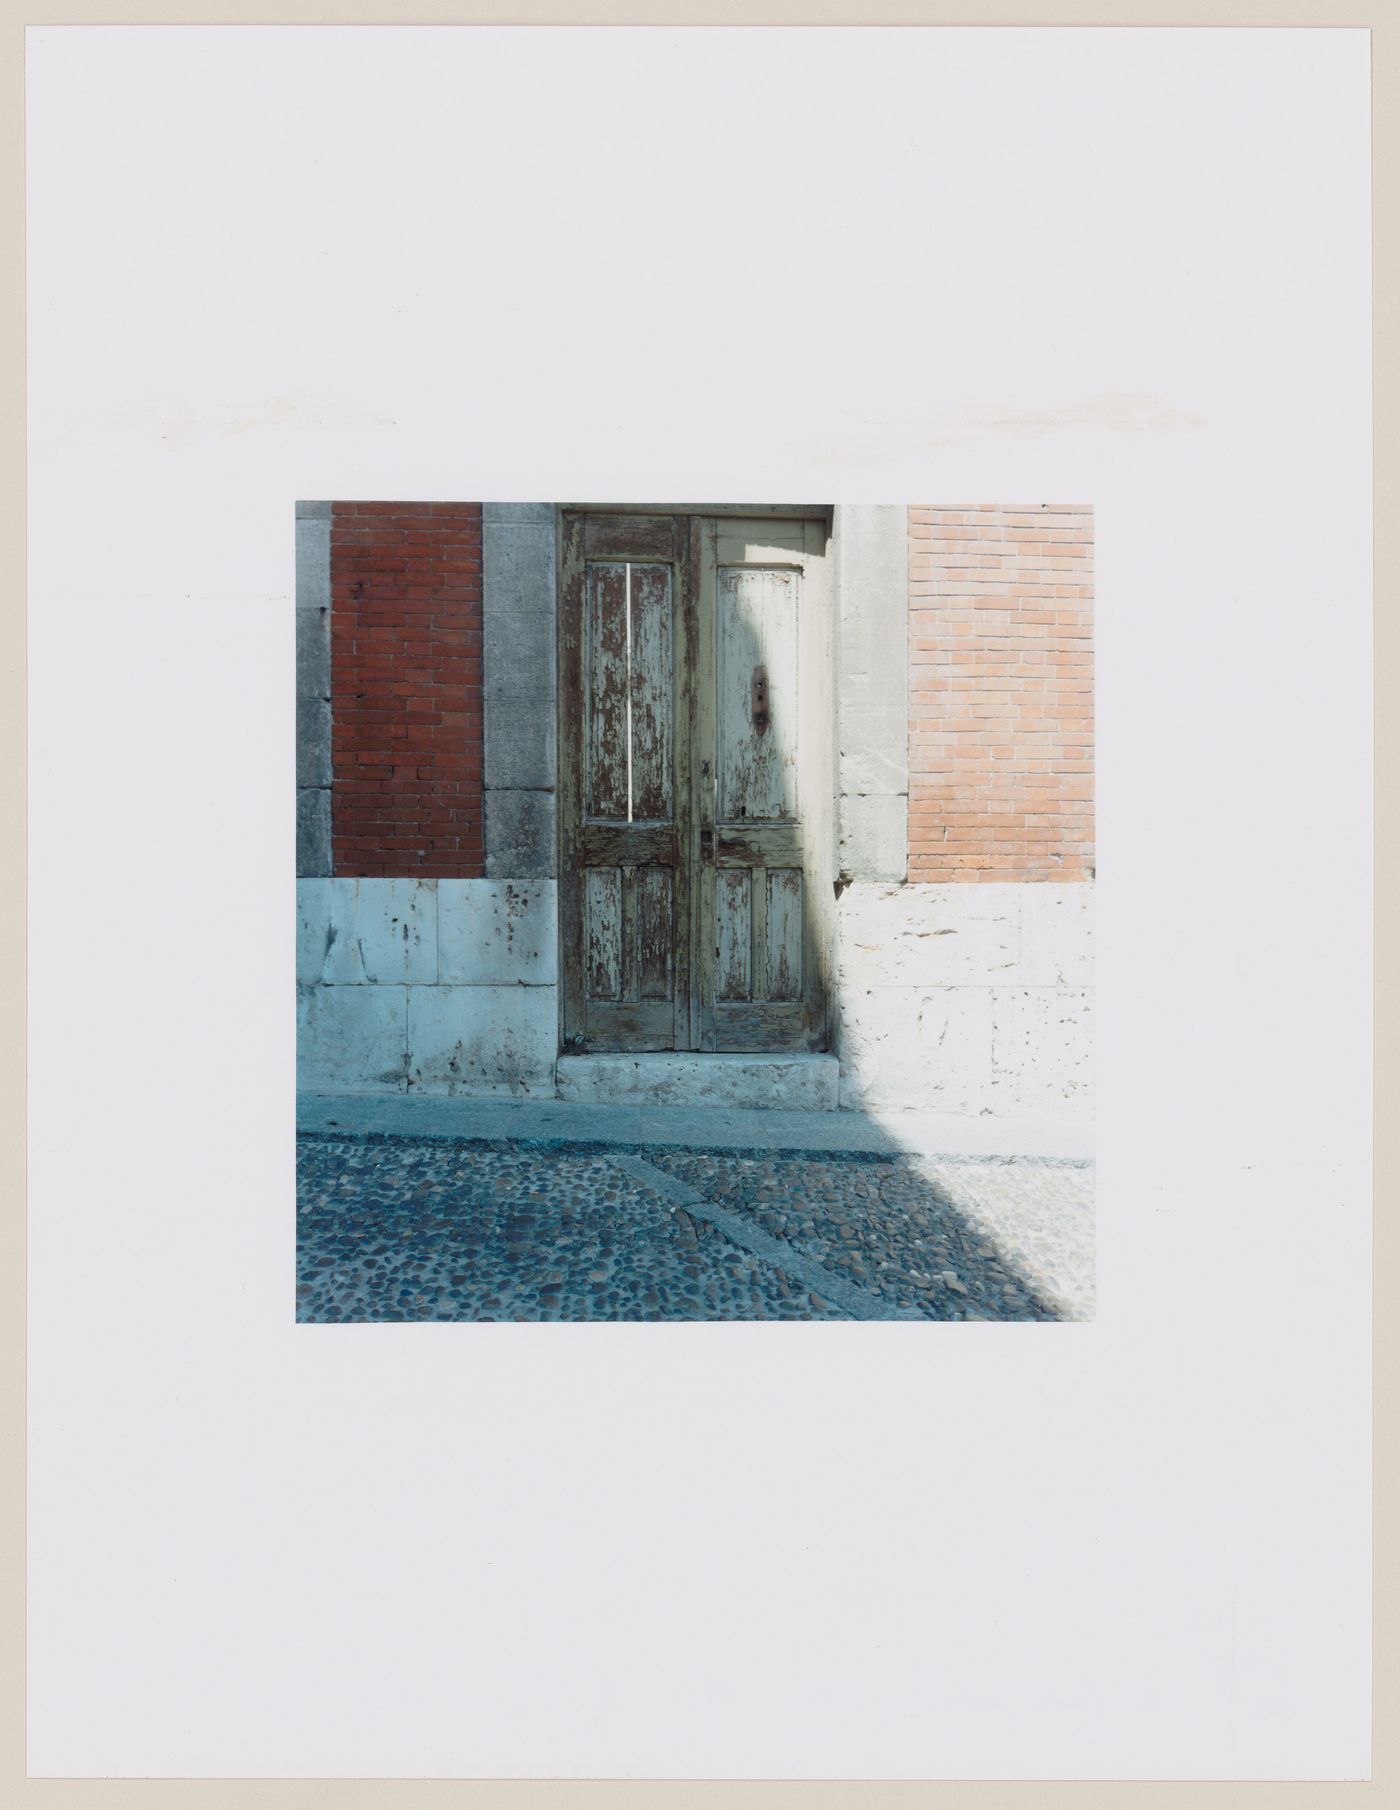 View of a doorway showing a cobbled street in the foreground, Santiago de Compostela, Spain (from the series "In between cities")